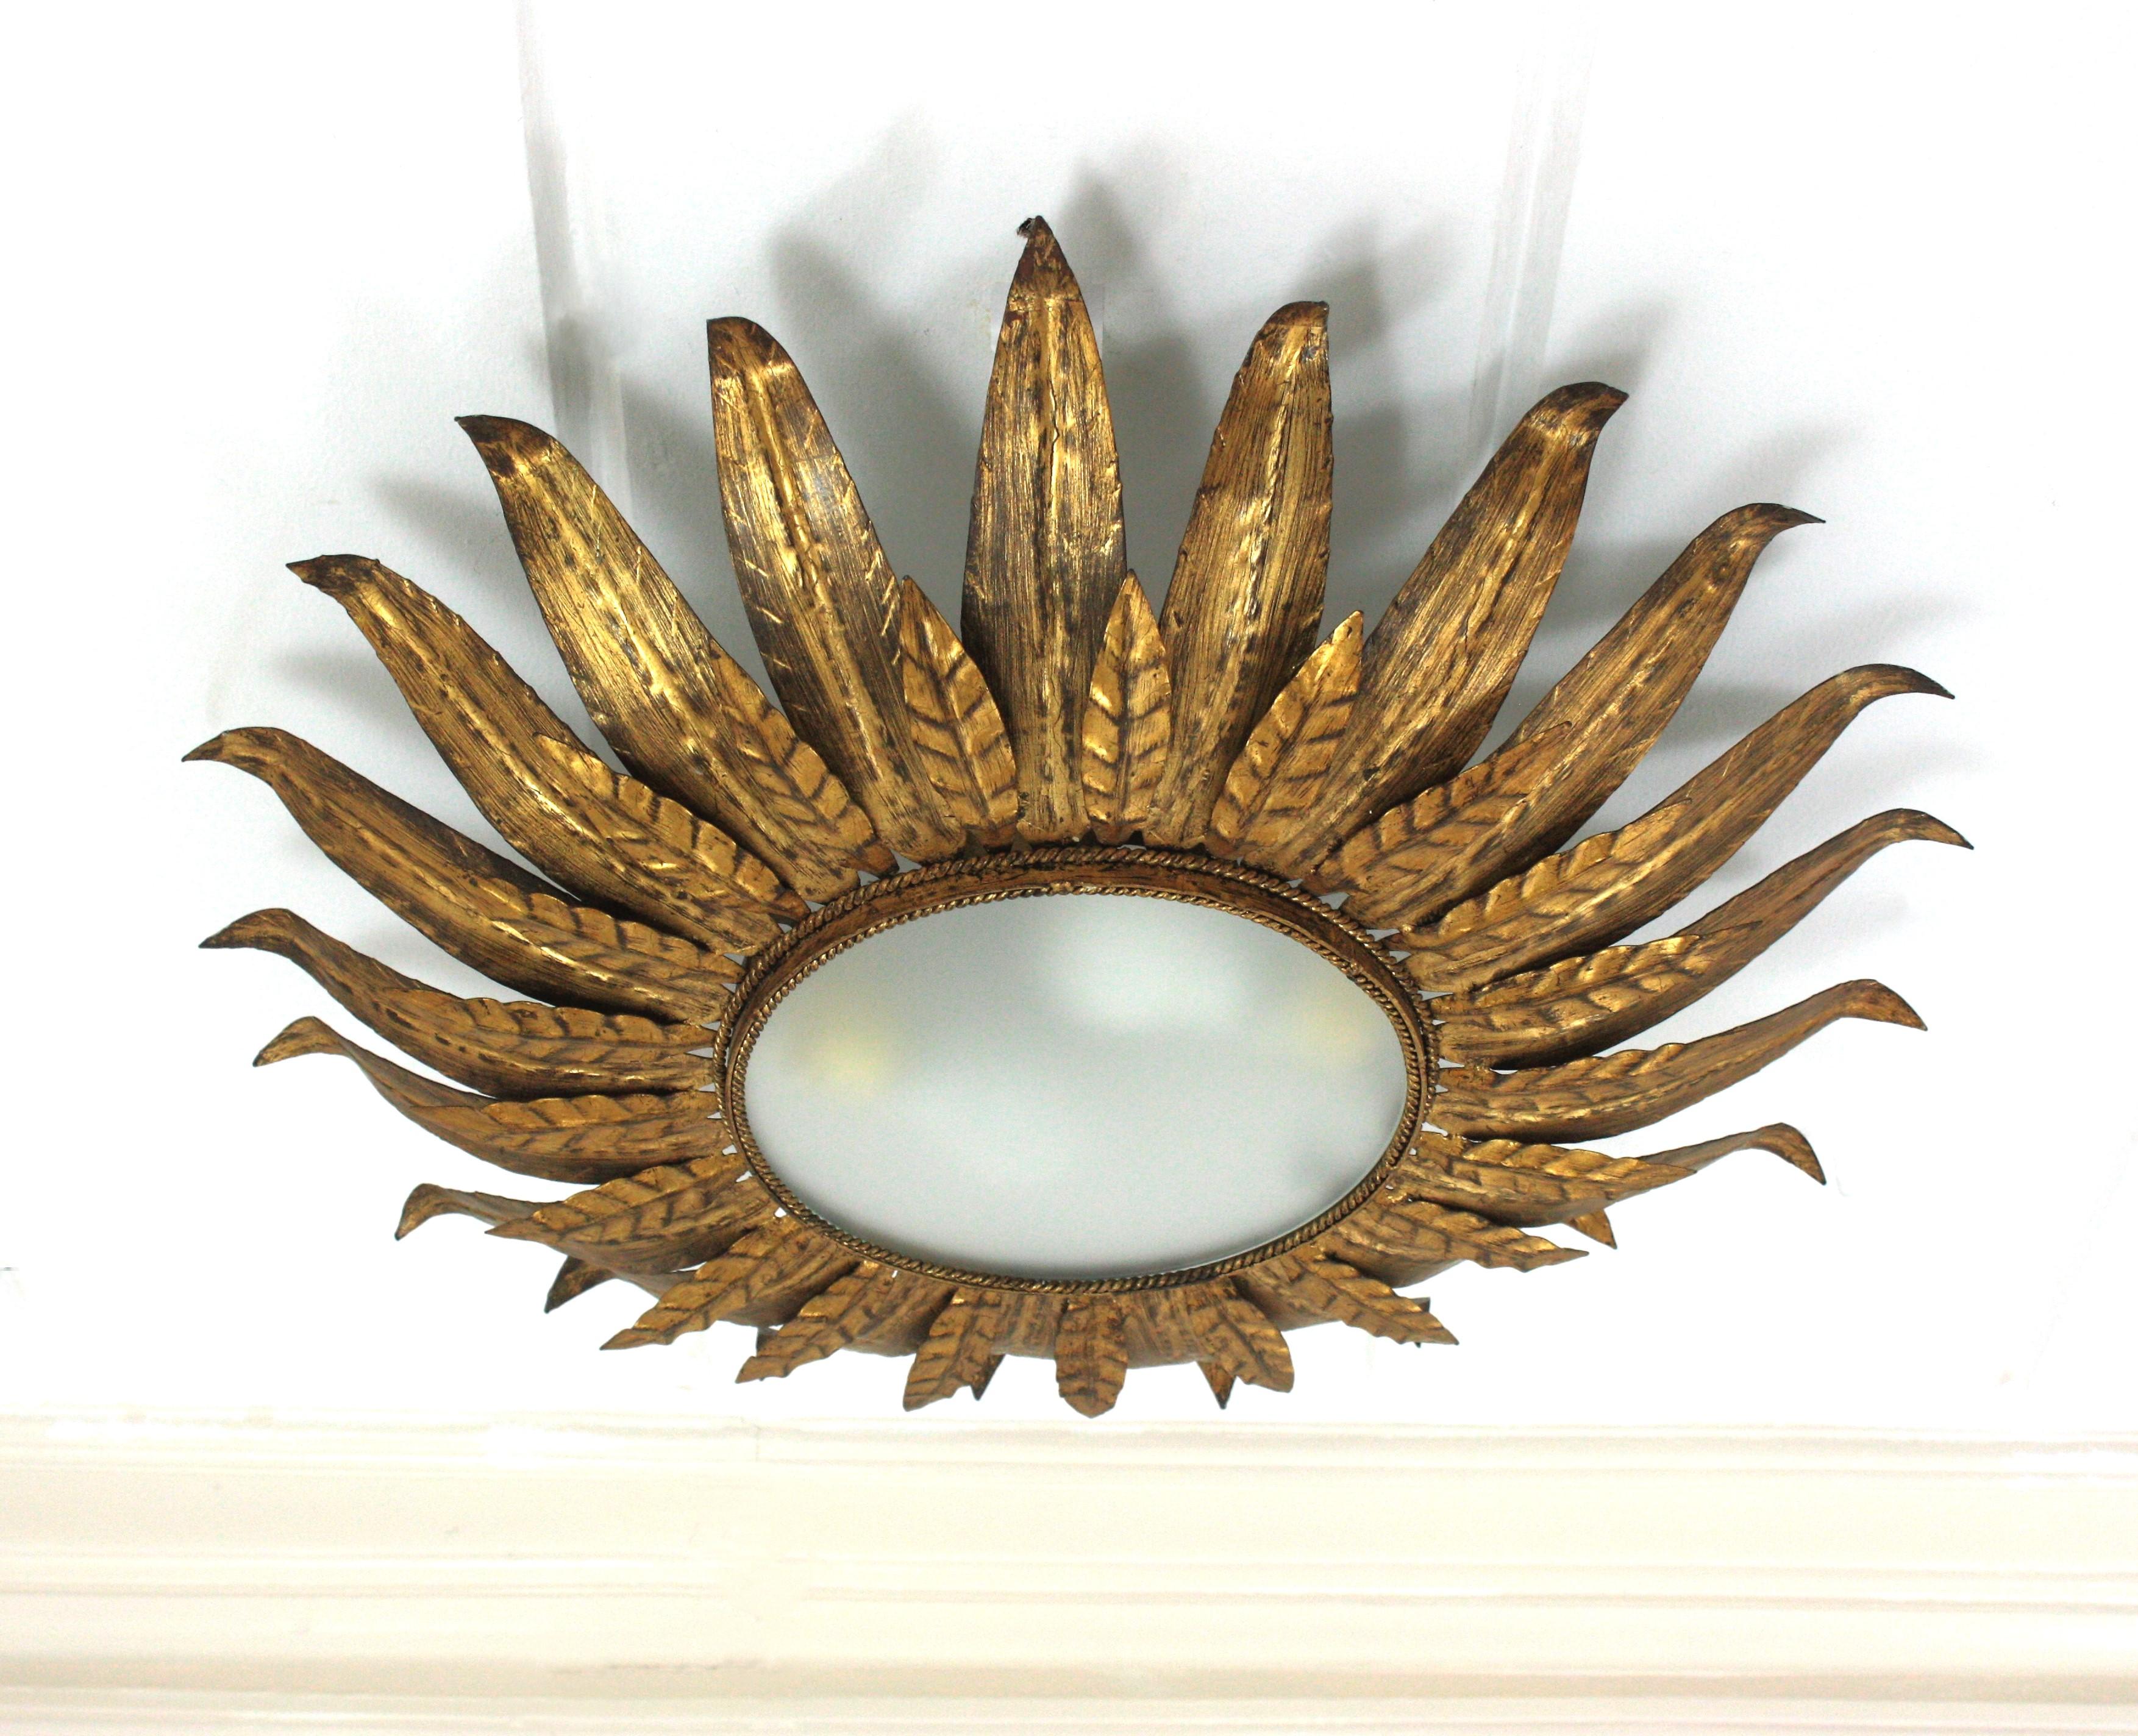 Large Sunburst Foliage Flower Light Fixture, Gilt Metal, Frosted Glass

Mid-Century Modern gilt iron sunburst flush mount or pendant with leaf motifs surrounding a central frosted glass diffuser, Spain, 1950s.
Double layer of gilt iron leaves frame.